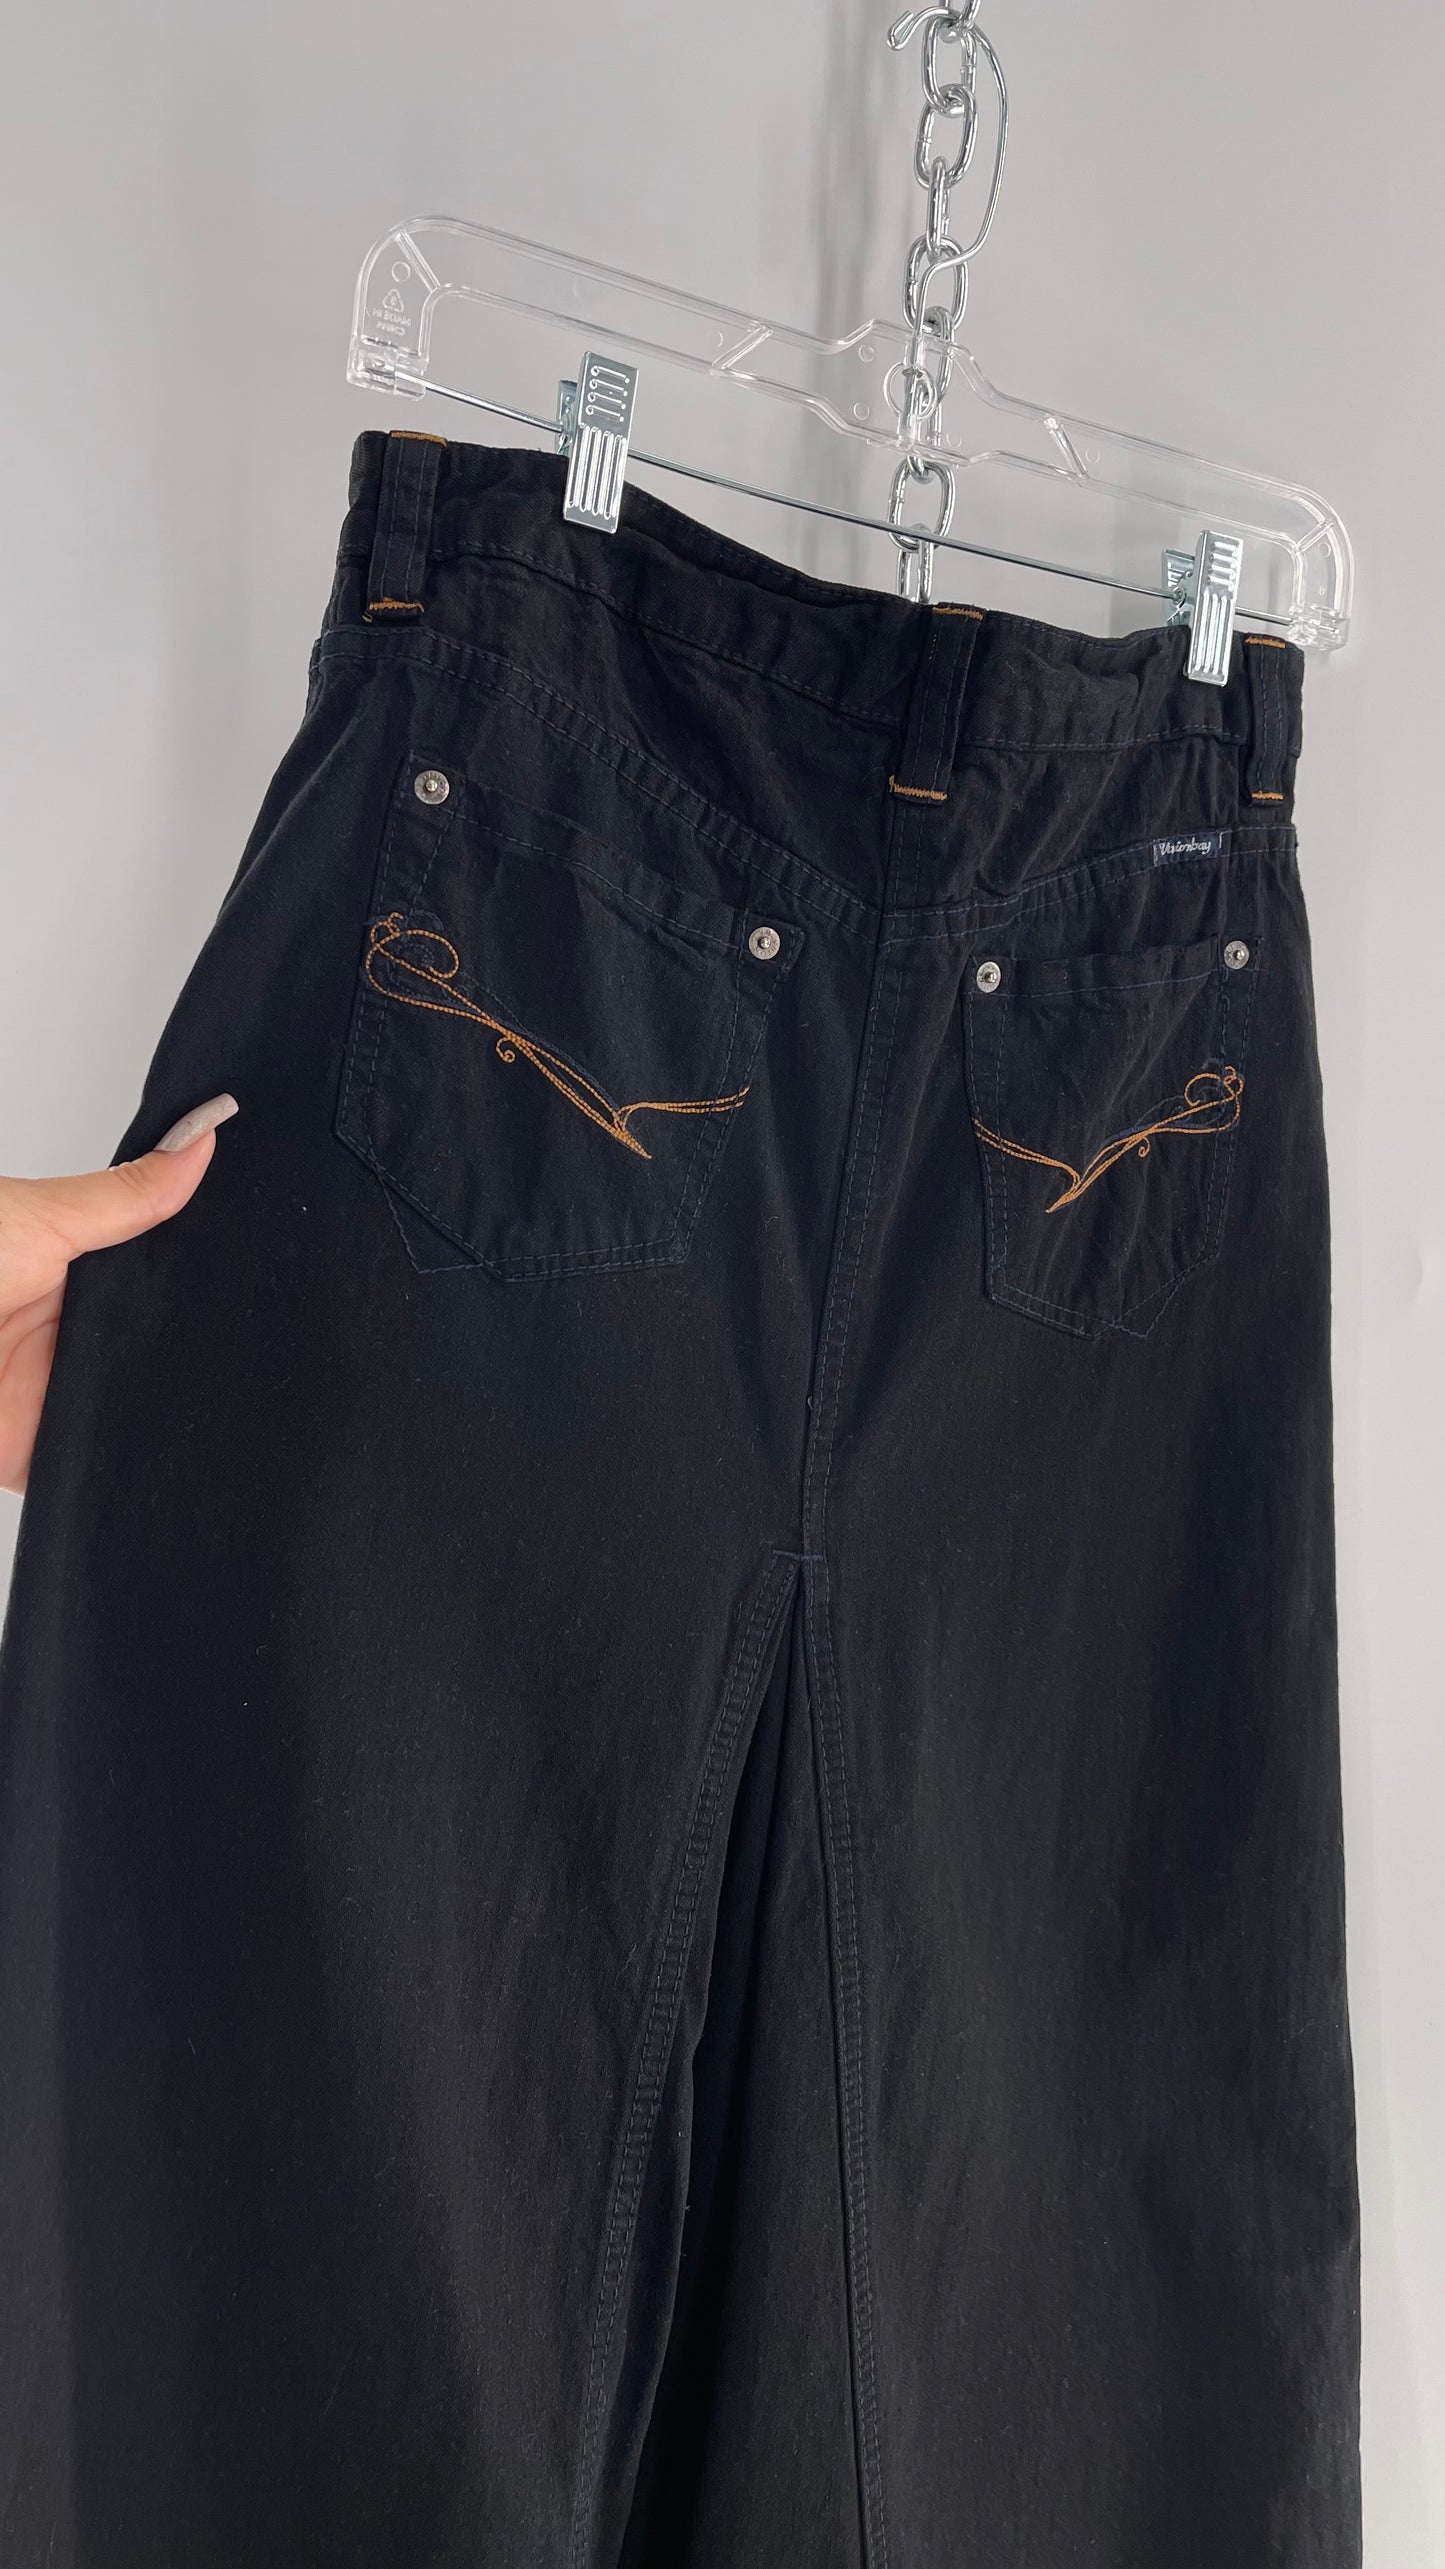 Vintage Urban Outfitters Renewal Union Bay Dark Wash Denim Full Length Skirt with Tags Attached (Small)